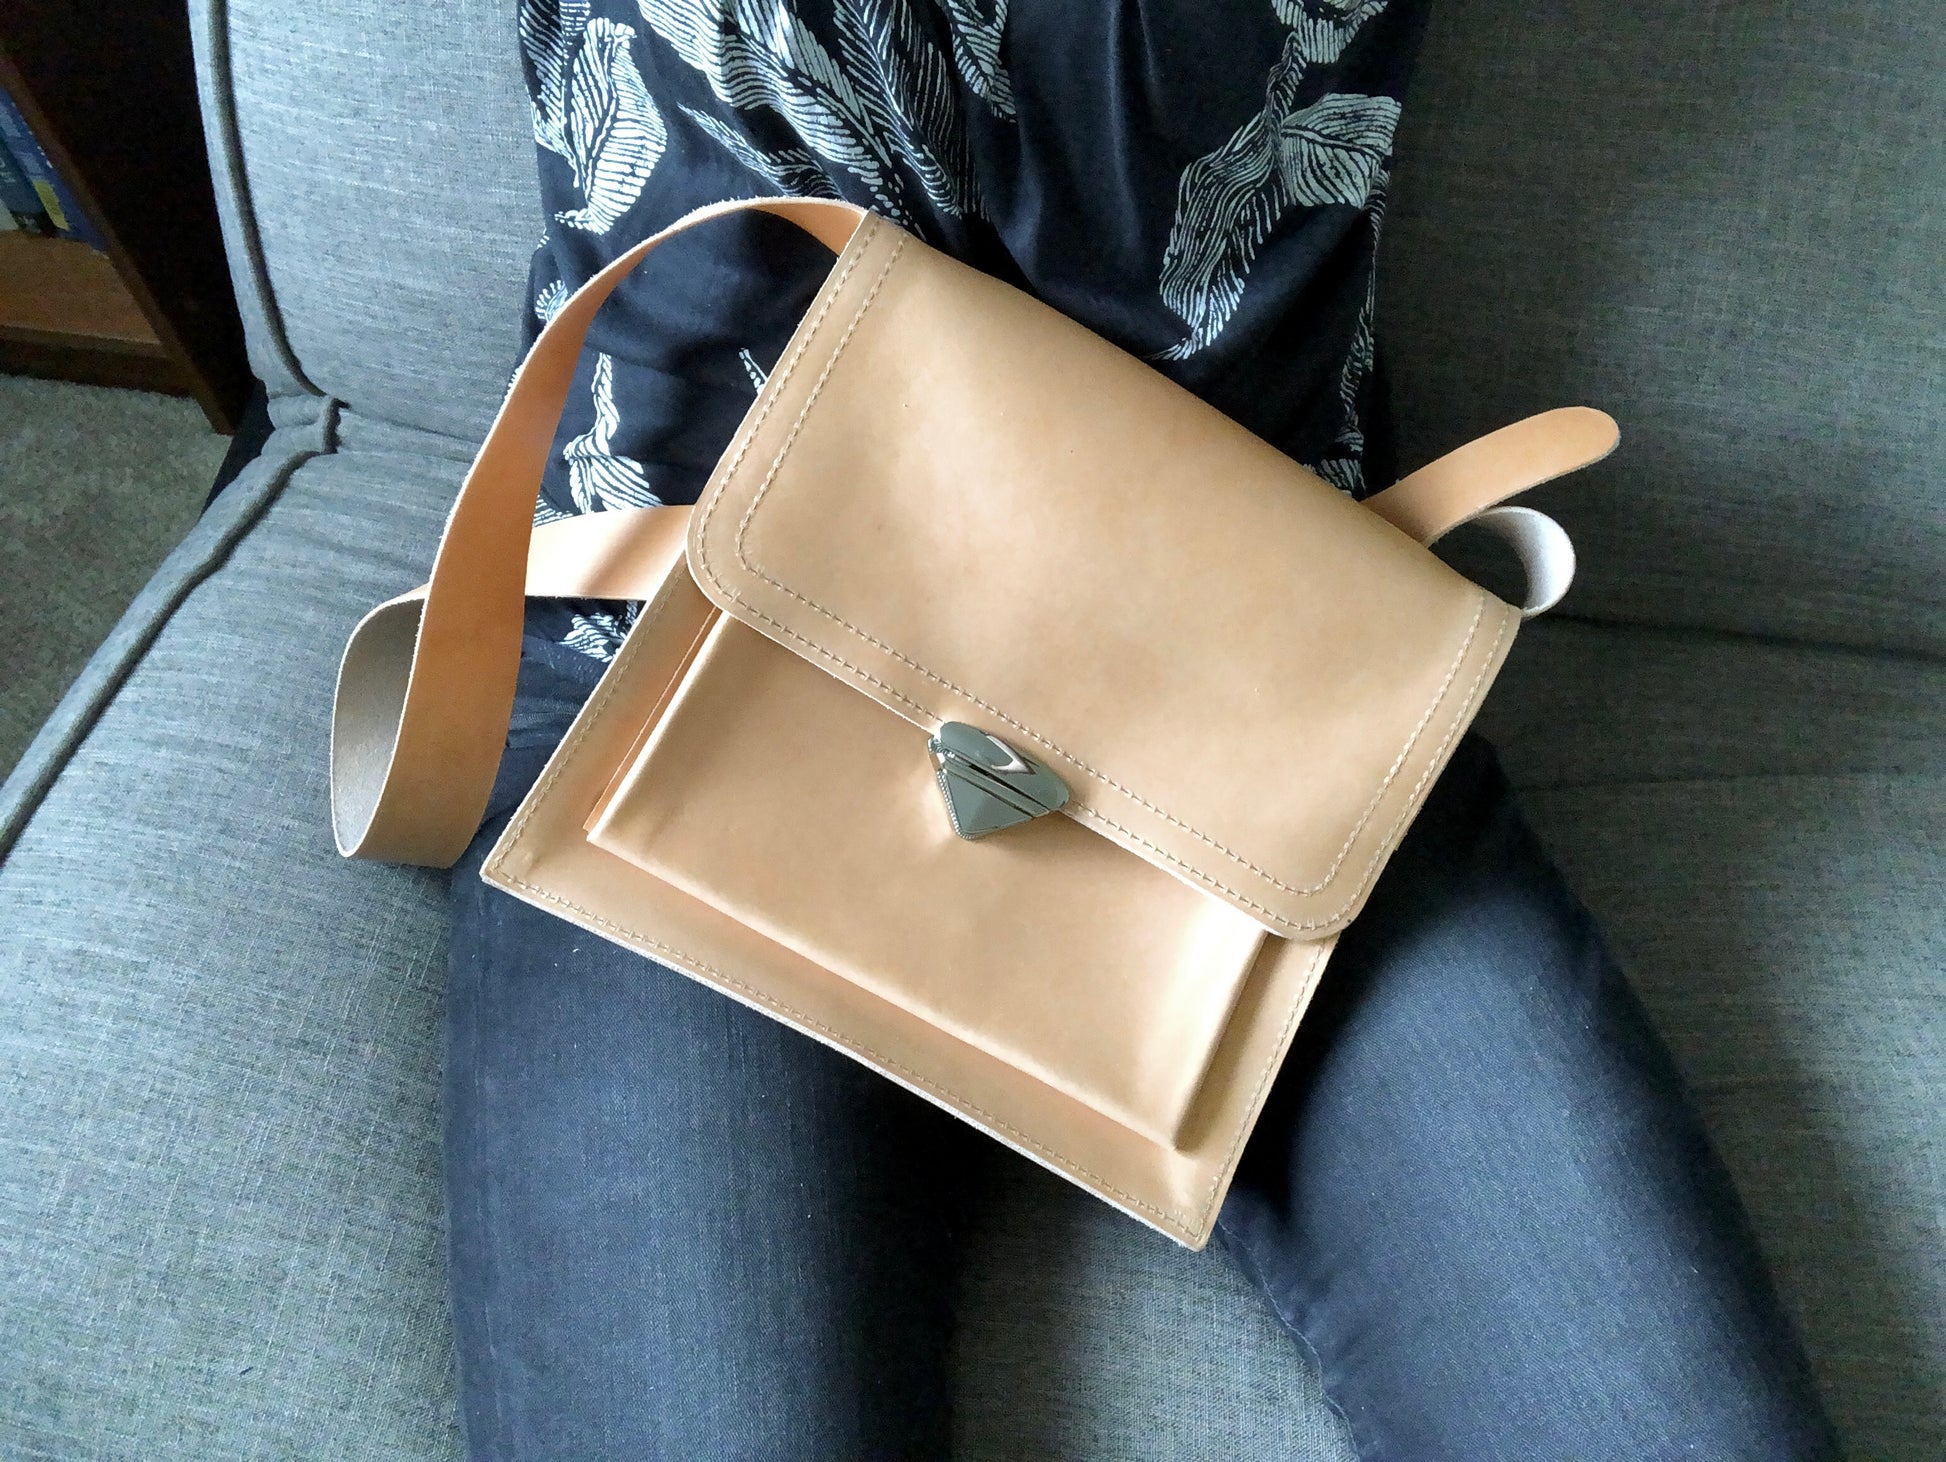 Buttery, nude leather messenger bag rests on a woman's lap.